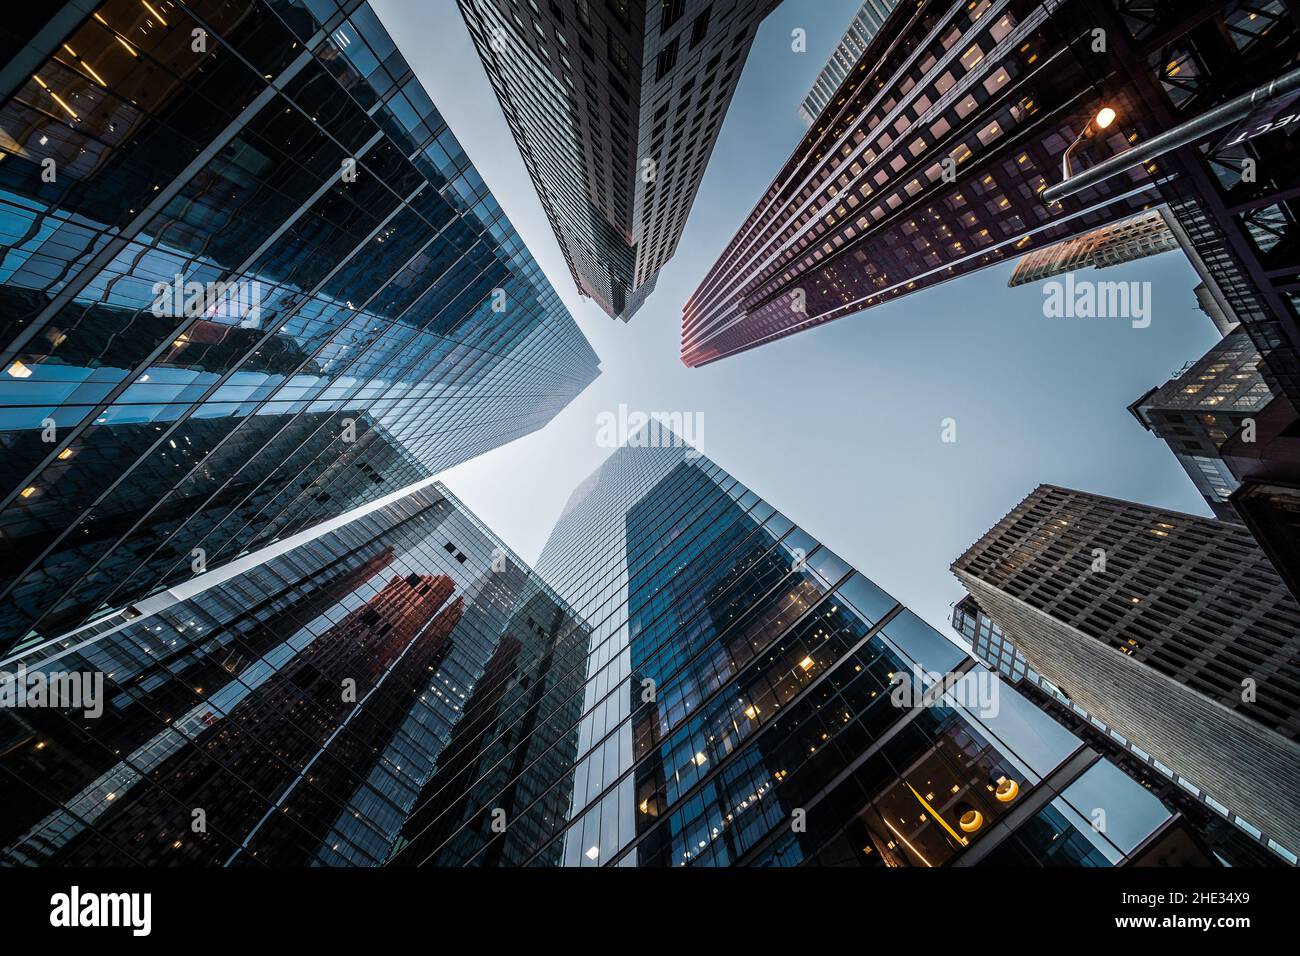 Business and finance concept, looking up at high rise office building architecture in the financial district of a modern metropolis. Stock Photo